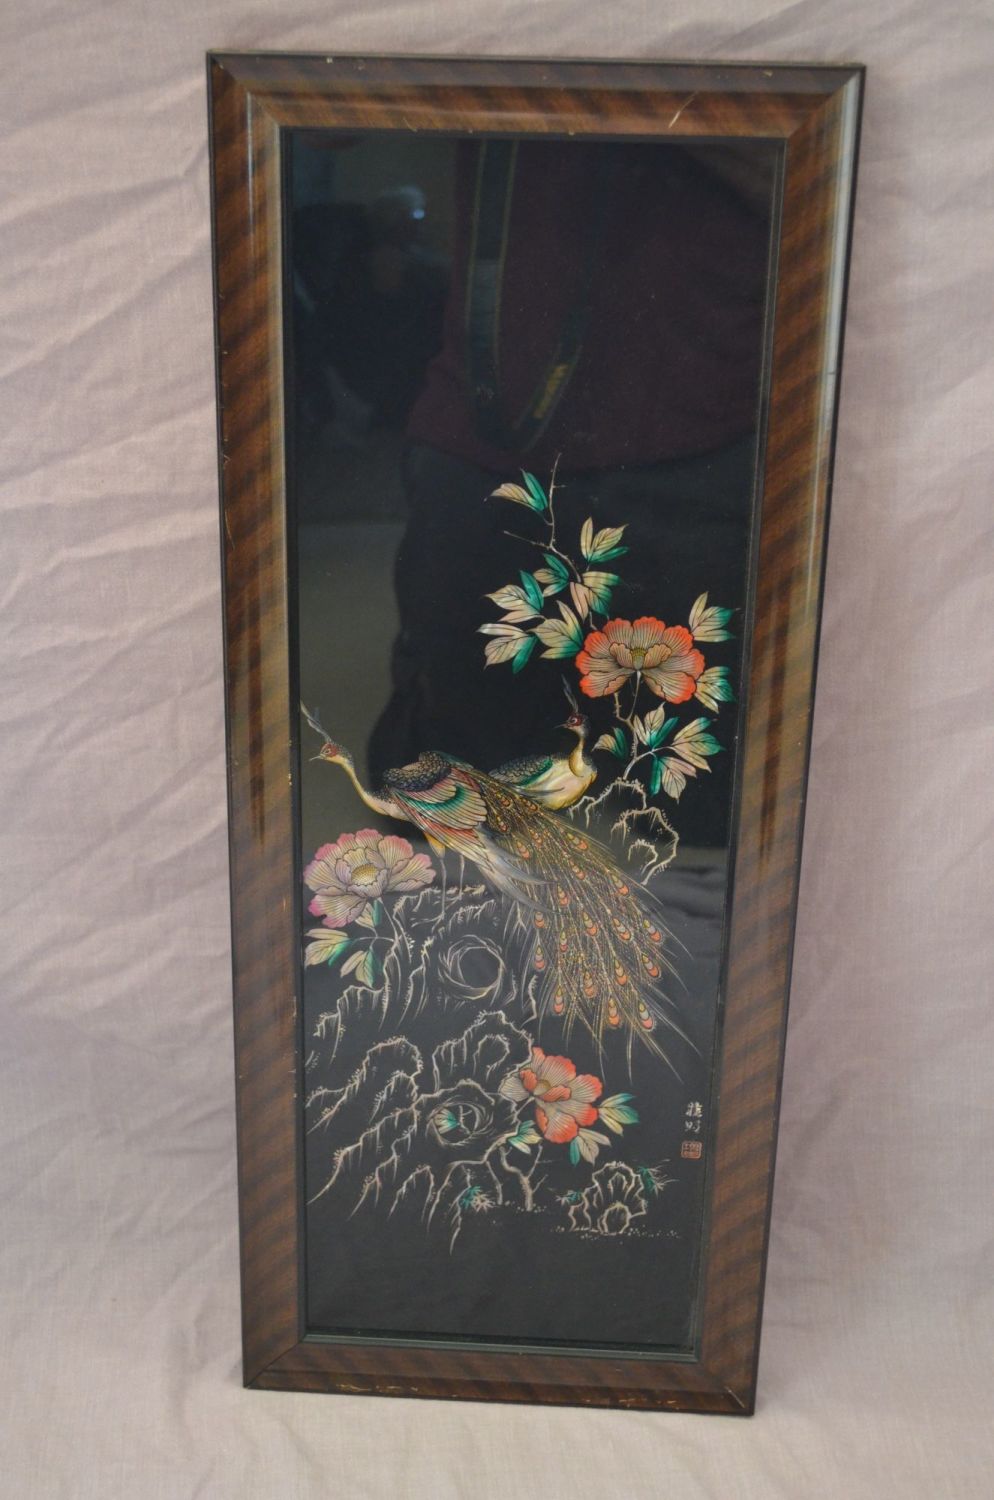 Chinese Reverse Painting on Glass Foil Backed Picture. Peacocks and Flowers